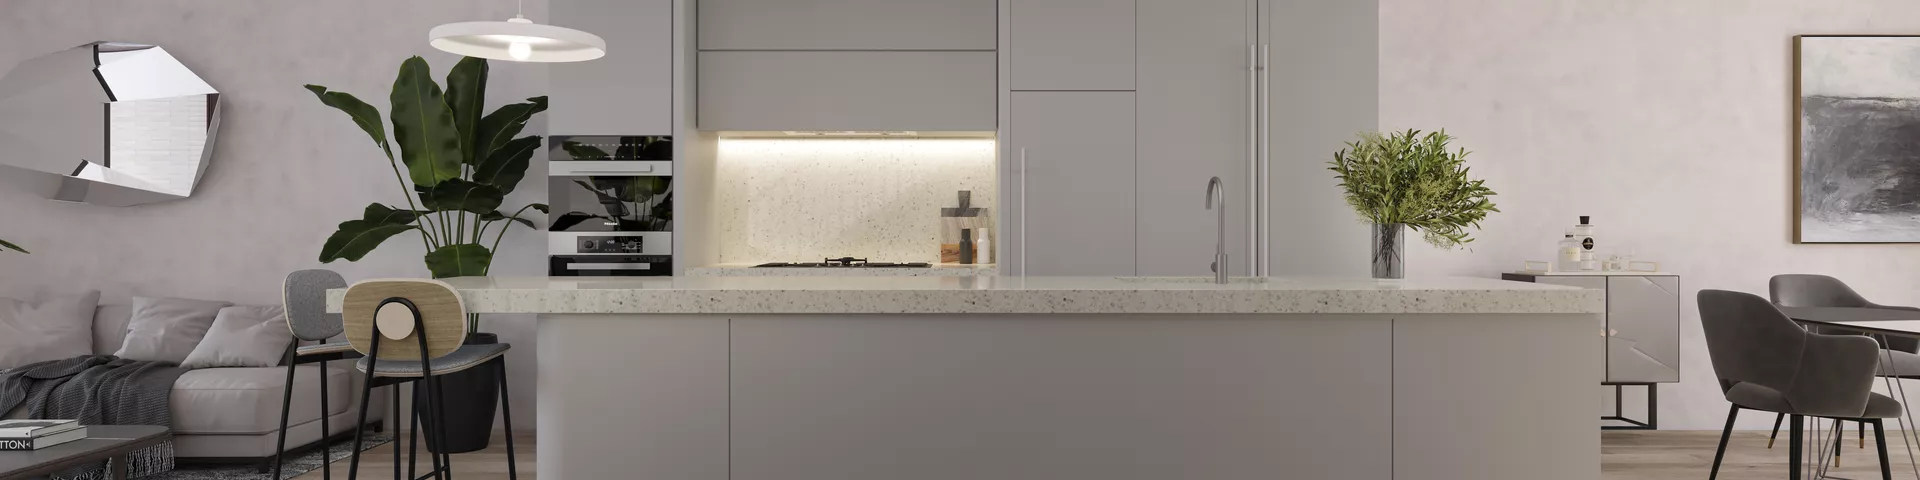 Gramercy Terraces Kennedy Ave contemporary kitchen